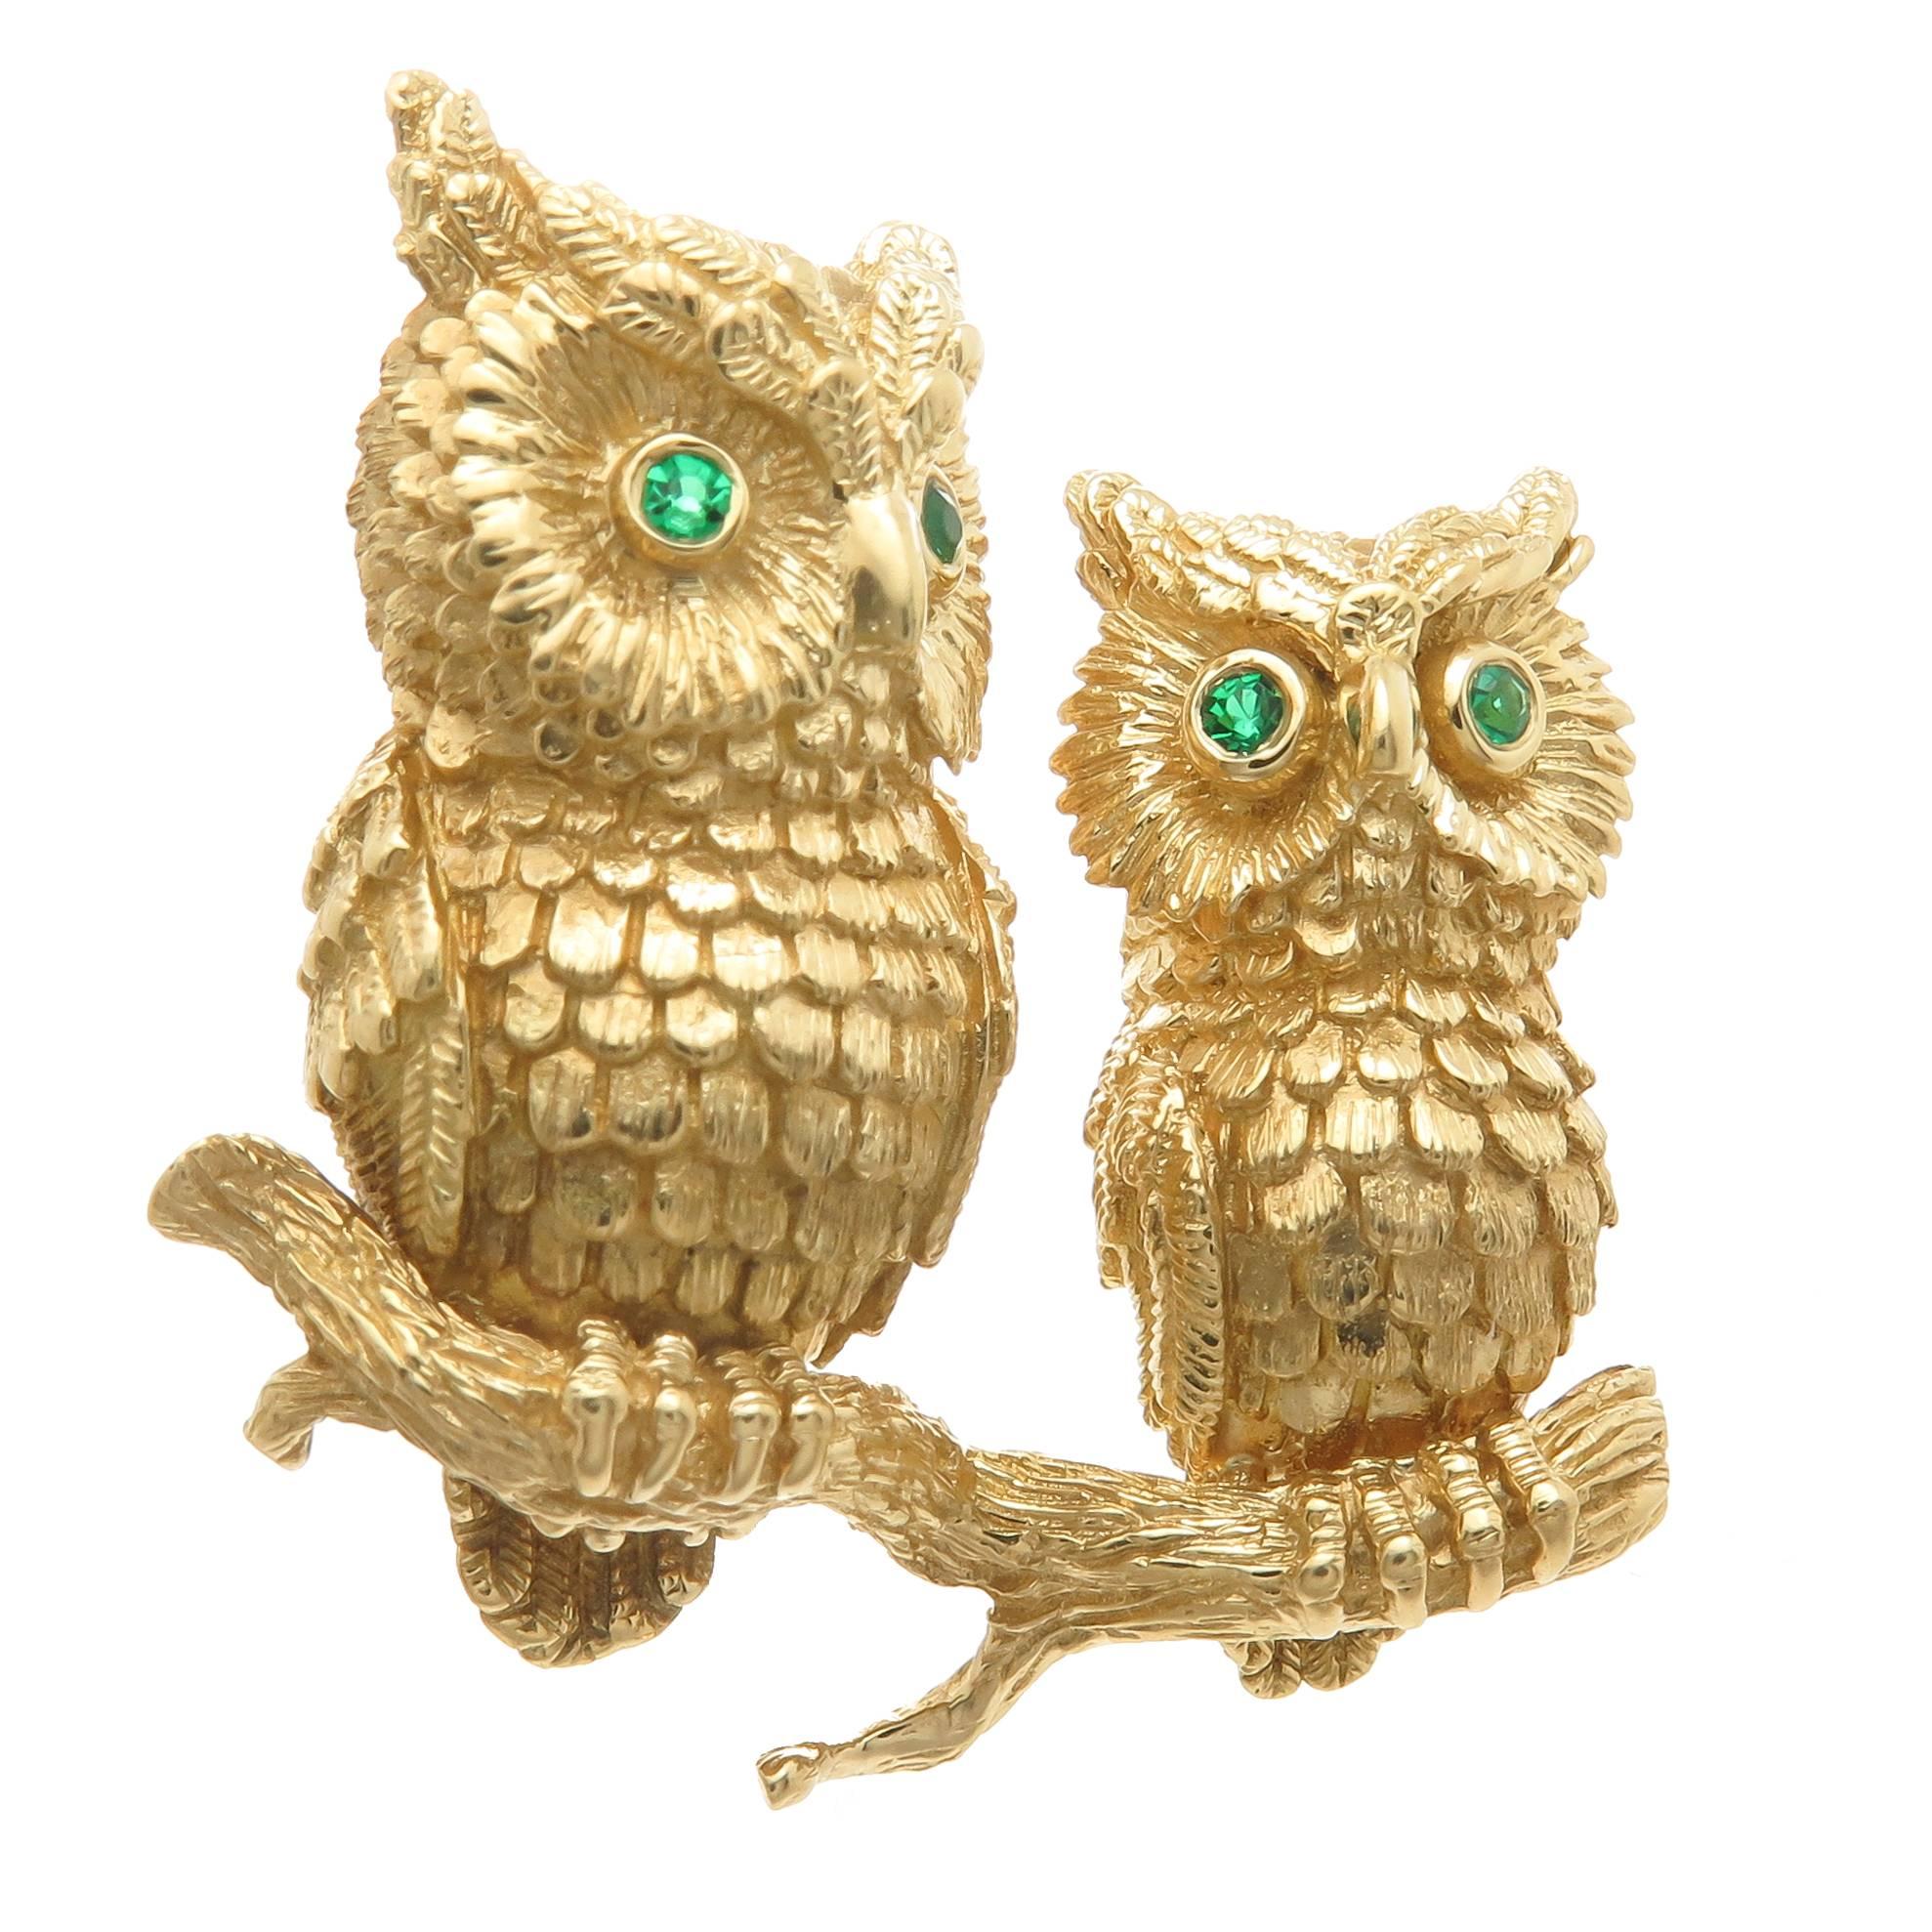 Circa 1990 Kurt Wayne 18K Yellow Gold Double Owls perched on a Branch Brooch, finely textured and detailed the Owls have Emerald set Eyes. Measuring 1 3/8 inch in length and 1 3/8 inch in height. 